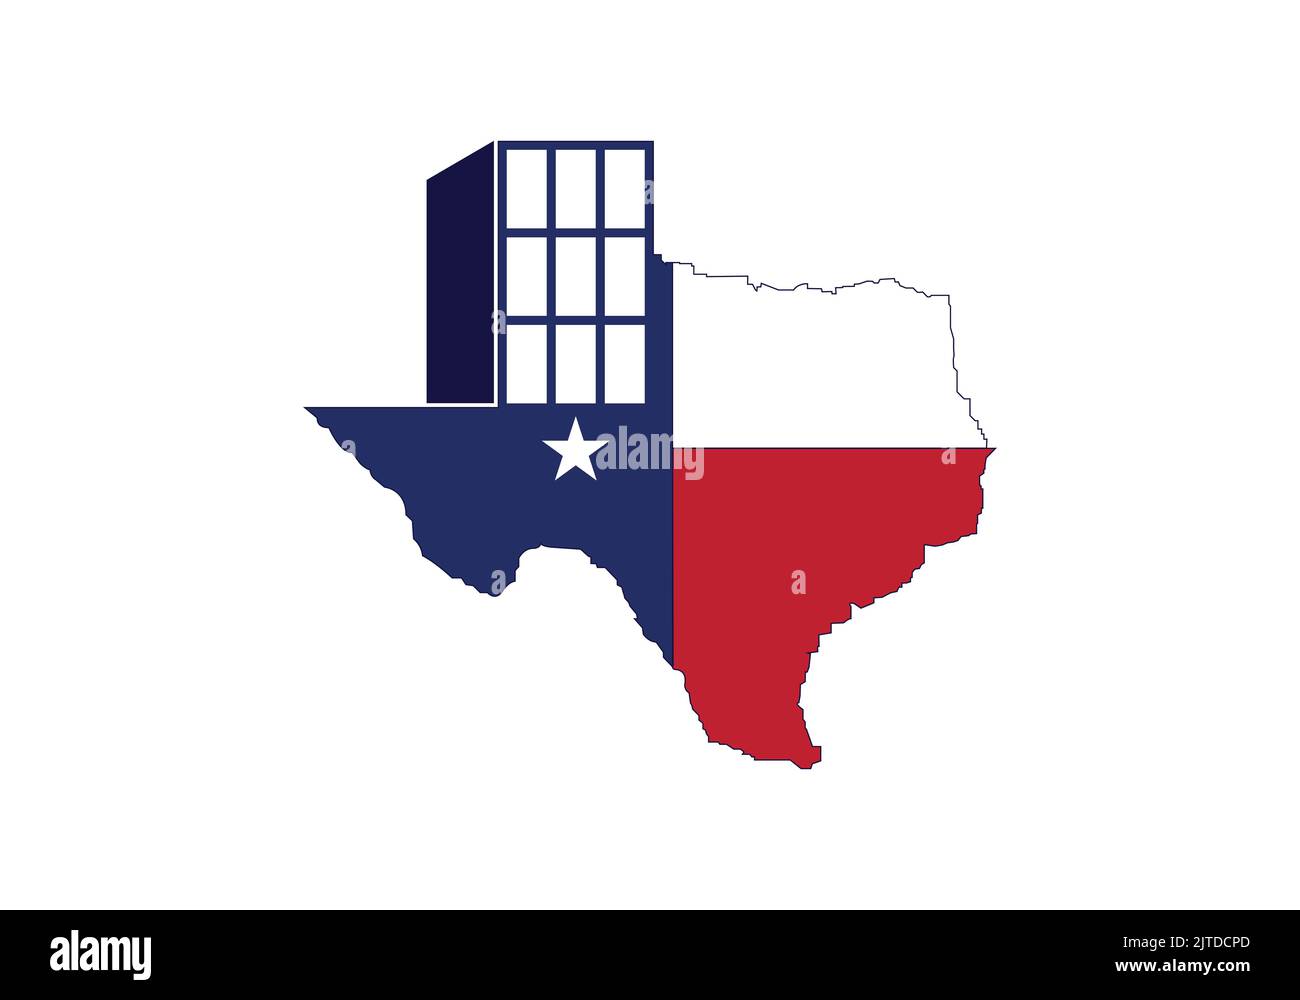 Texas Flag Map for Real Estate Construction Multiuse Services TX Corporate Building Stock Vector